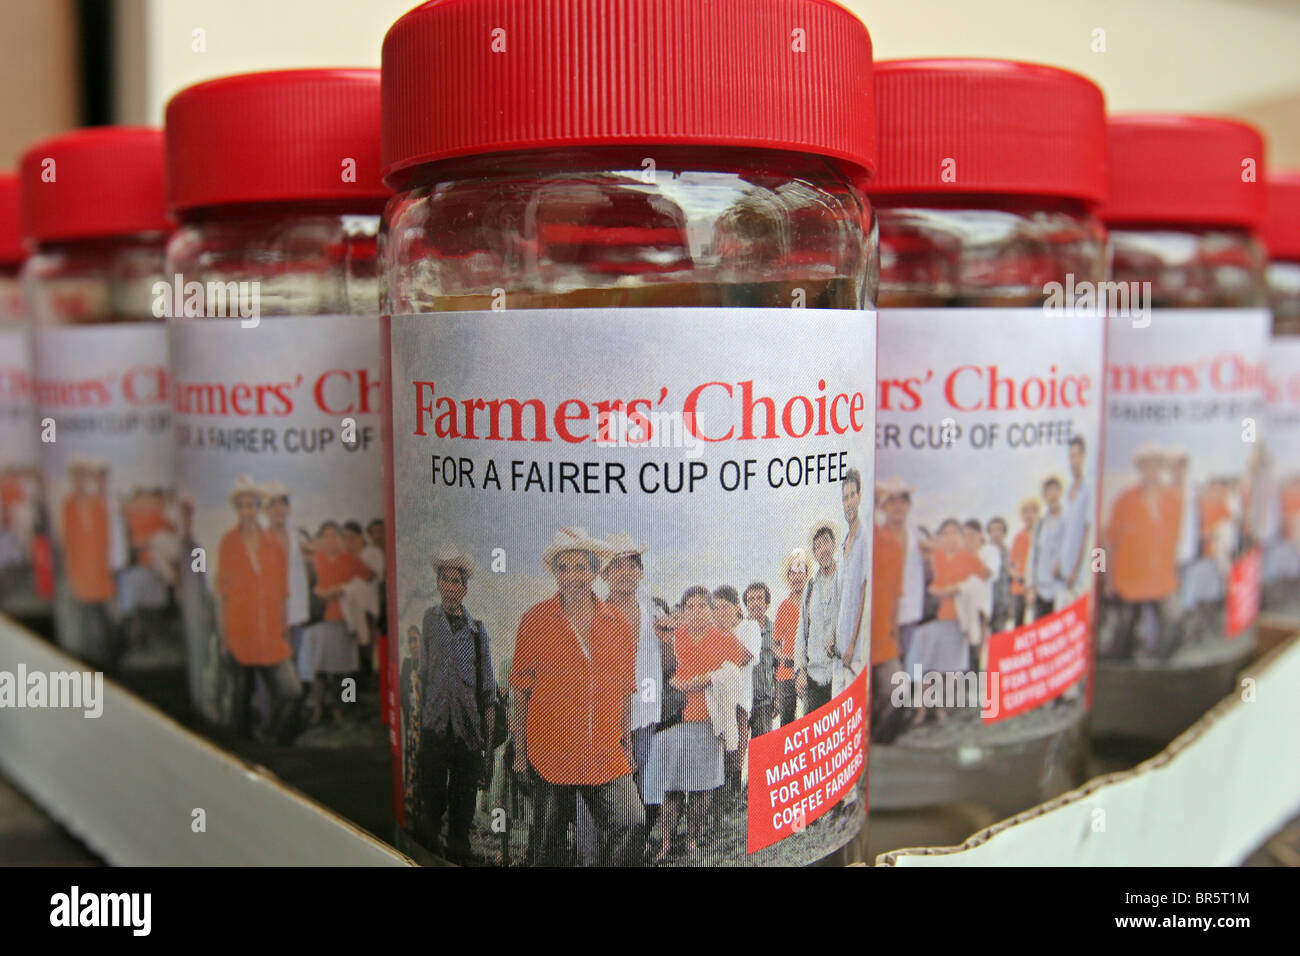 An Oxfam campaign for fair trade coffee production with mock coffee jars called Farmers choice. Stock Photo